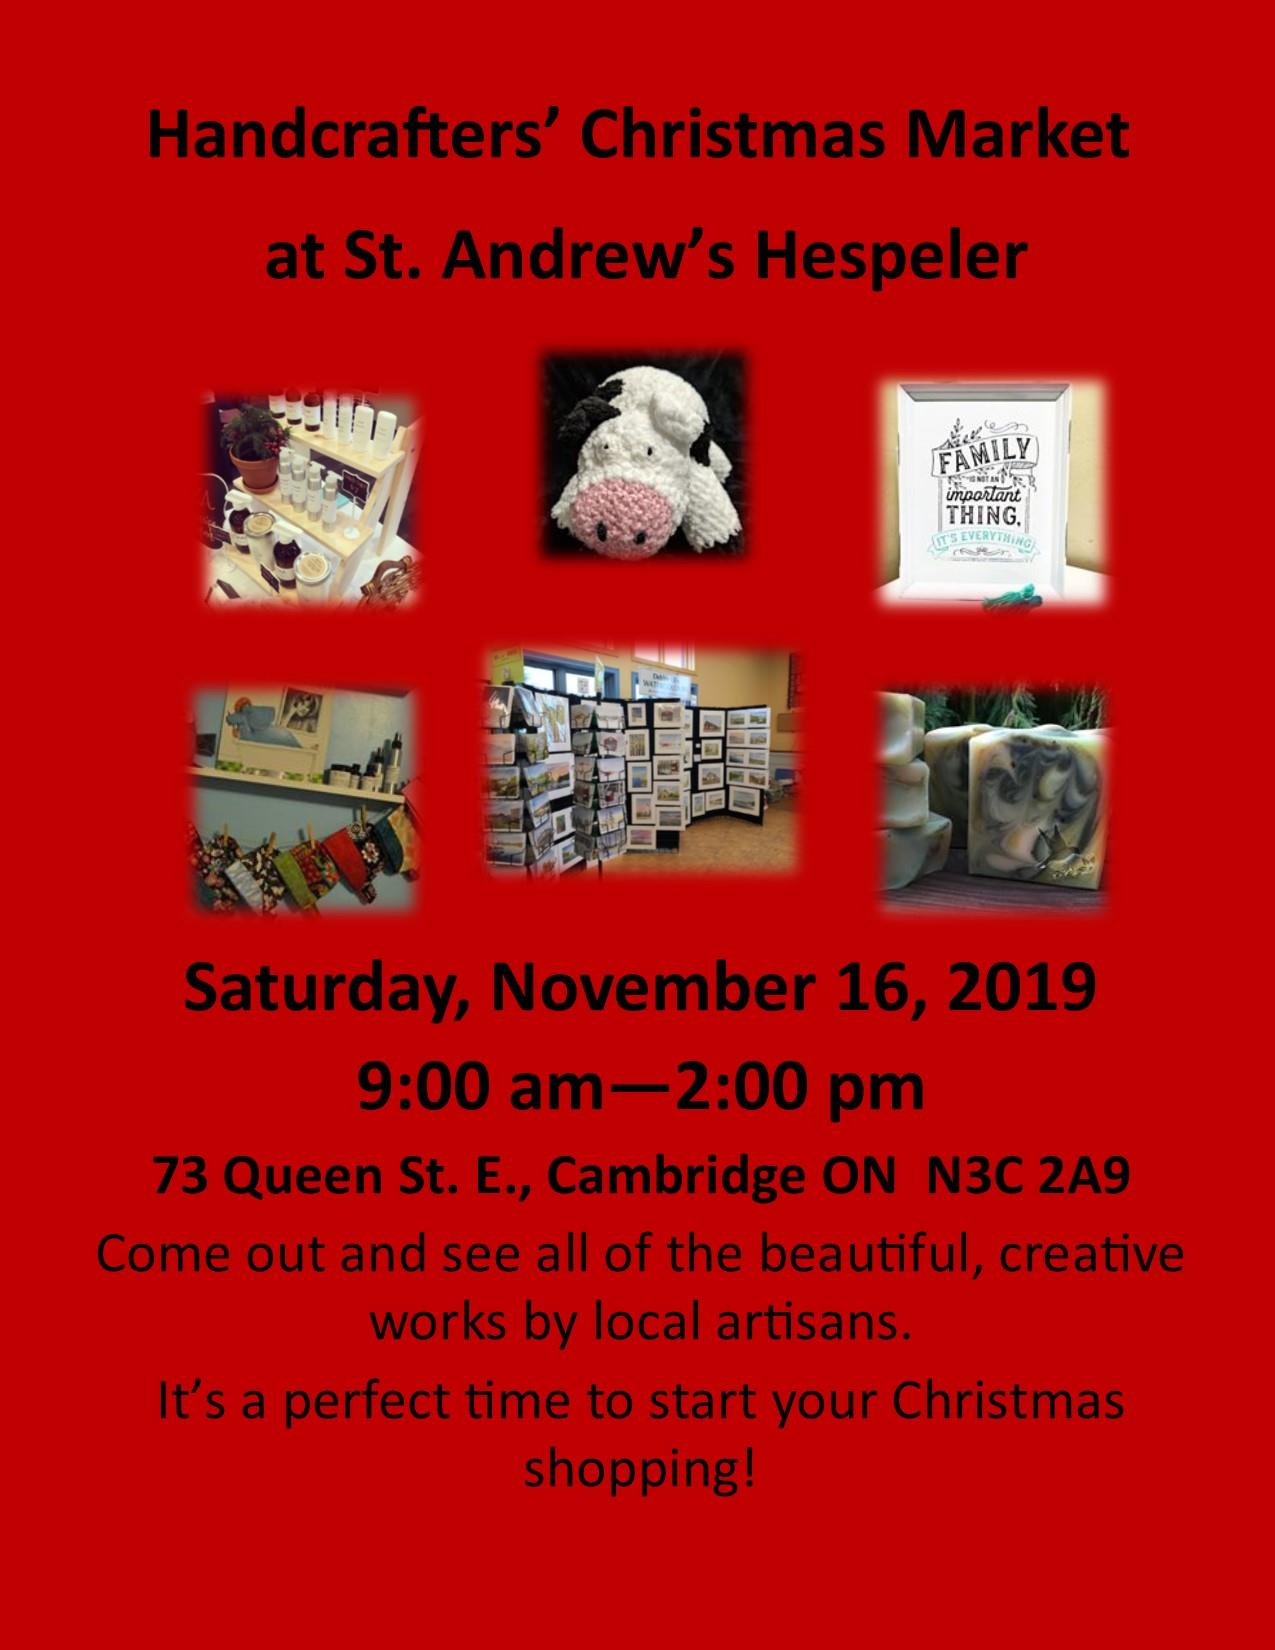 Red poster with pictures of various crafts for purchase as St. Andrew's Hespeler Craft Show